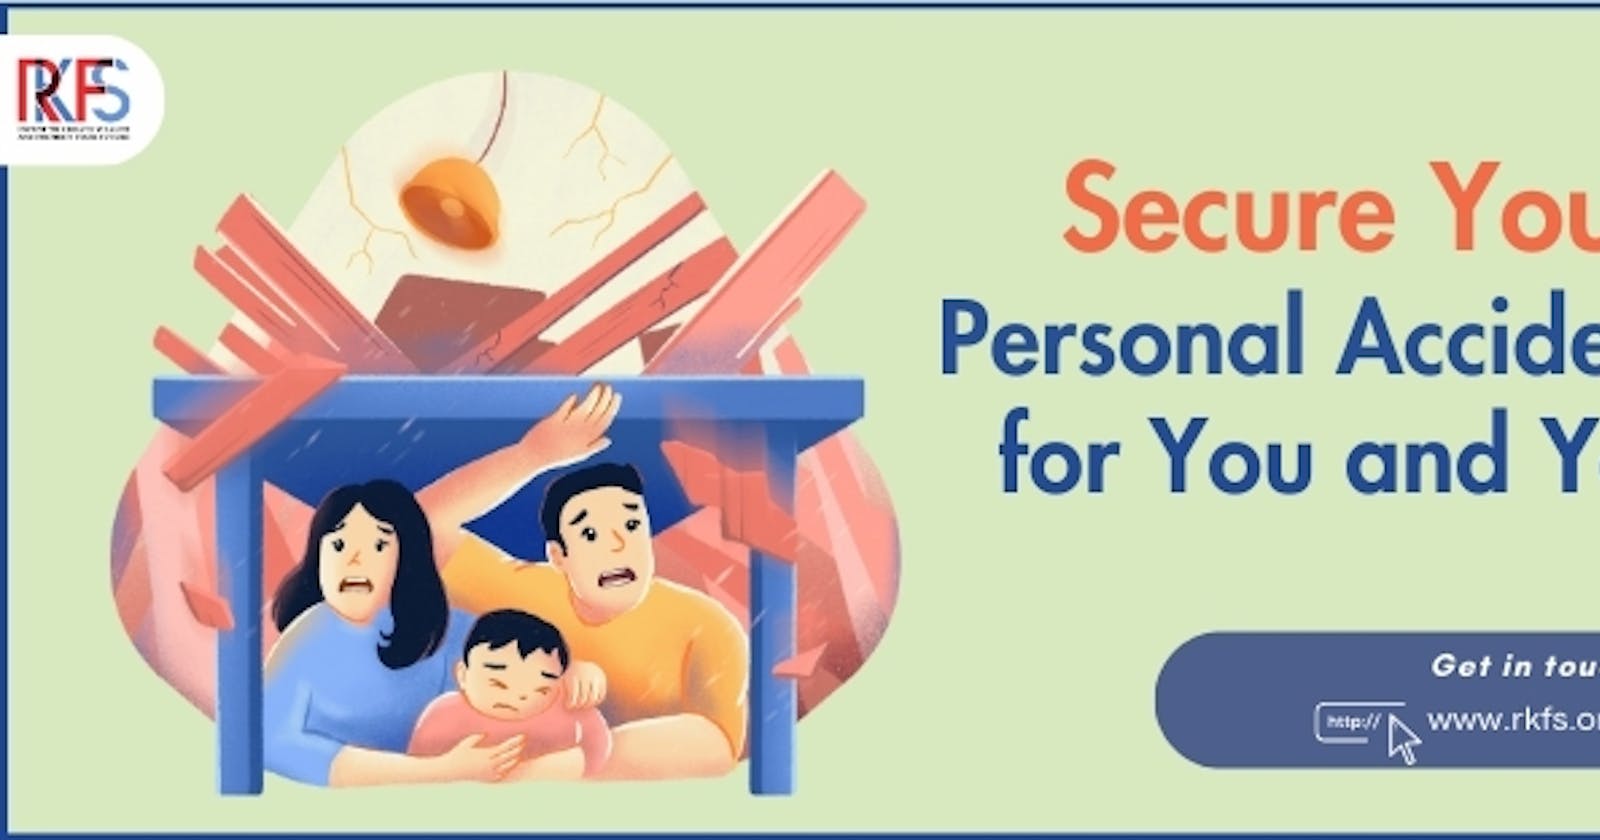 Secure Your Future: Personal Accident Insurance For You and Your Spouse